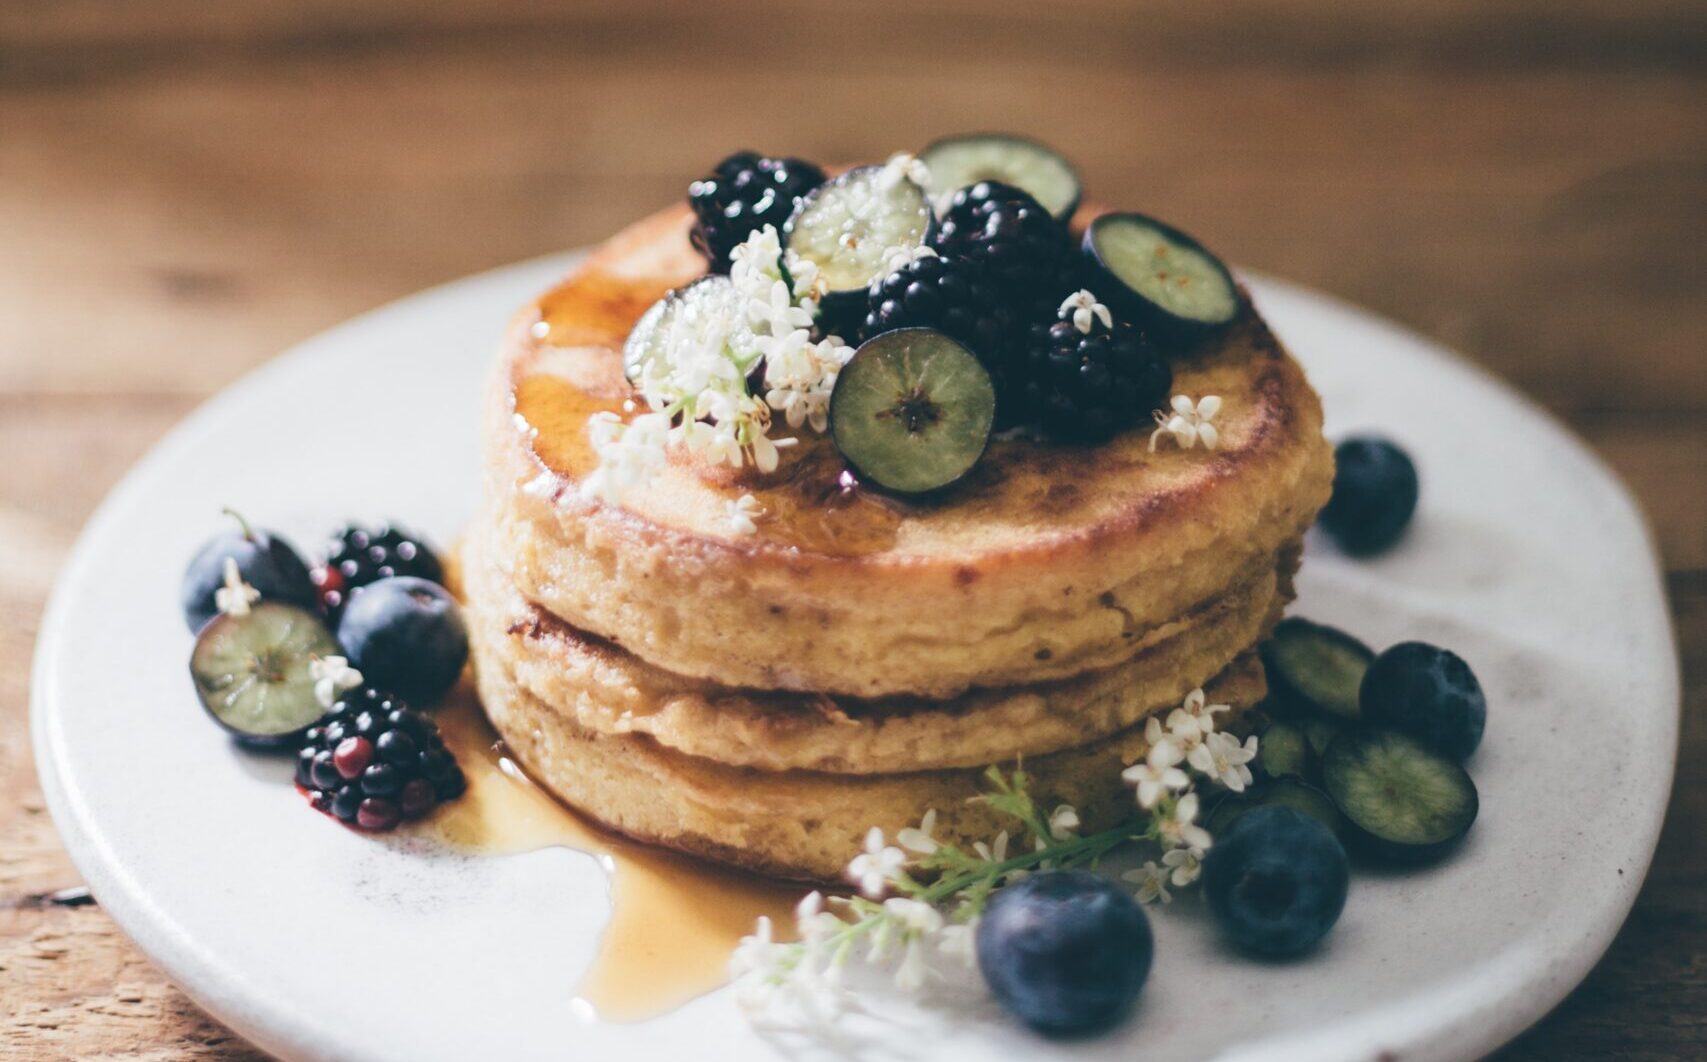 Pancakes with blueberries, syrup and flowers for garnish